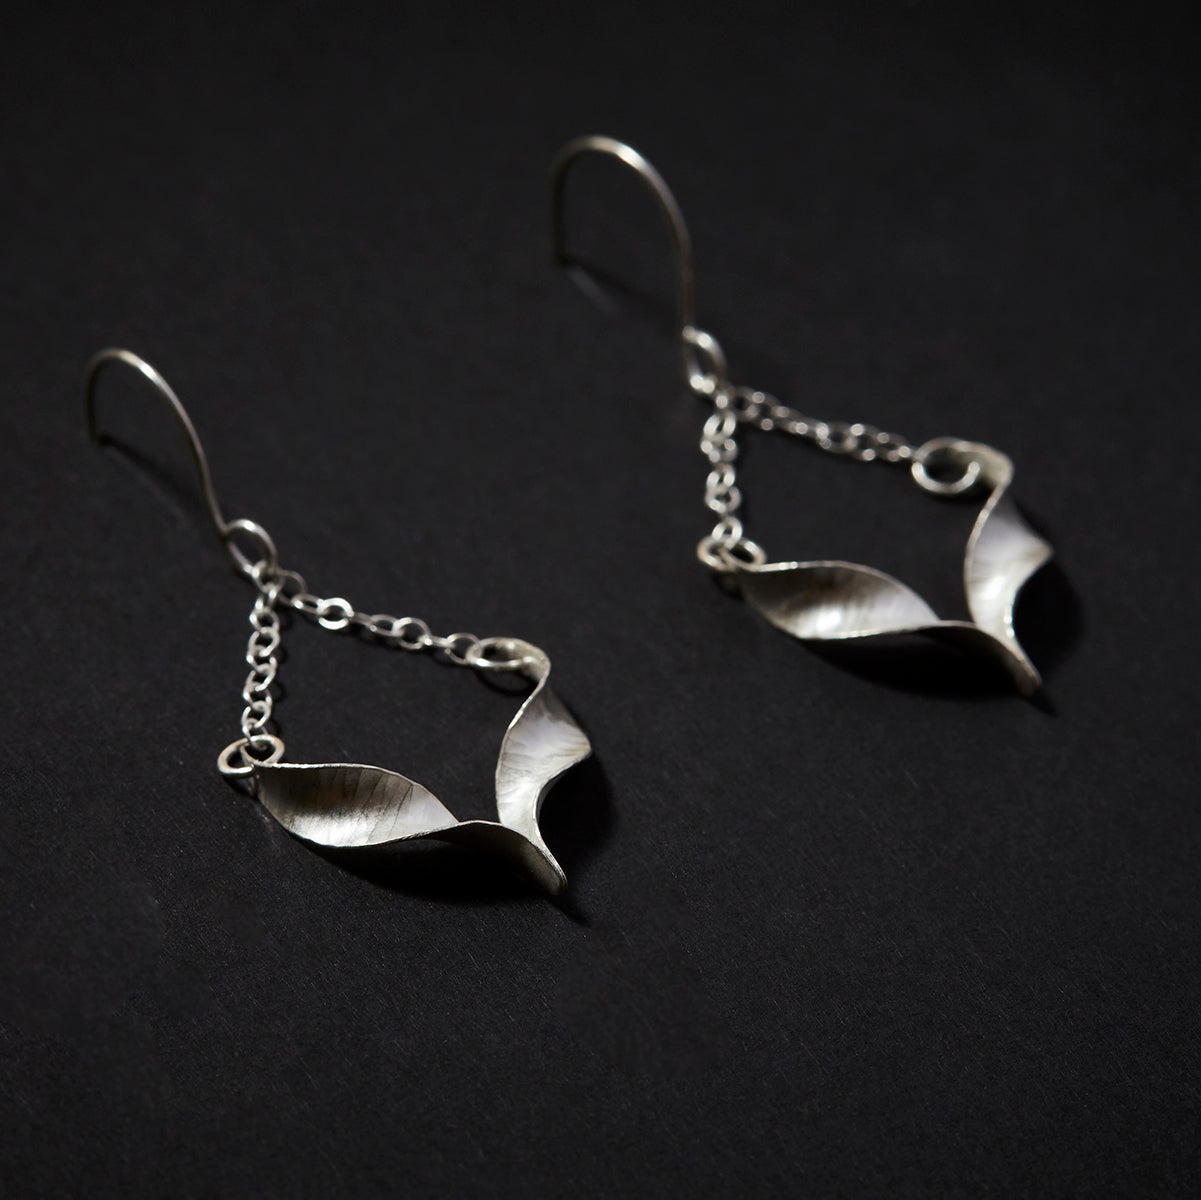 A pair of sculptural silver bird earrings. Each is composed of two twists of hammered silver joined at the central point and hanging from a handmade hook by means of delicate trace chain. They have a hammered texture, non-reflective finish and burnished edges. Shown lying at an angle.